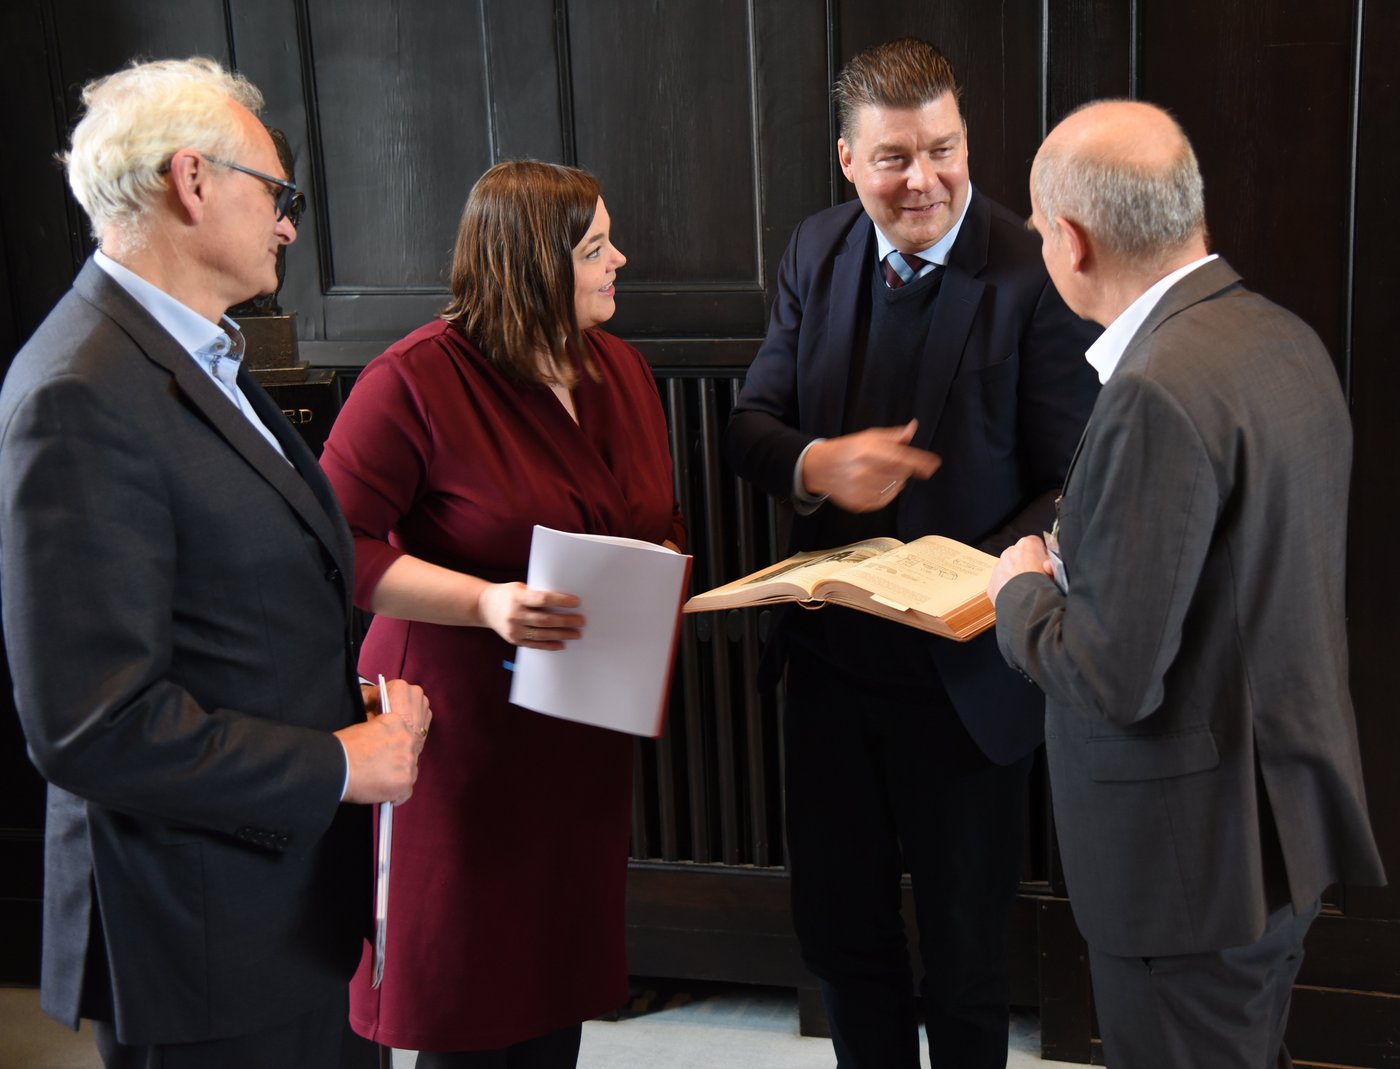 The picture shows from left to right Martin Görge, Katharina Fegebank, Andreas Dressel and Jürgen May. They are bending over a historical book about the BNITM from 1914.